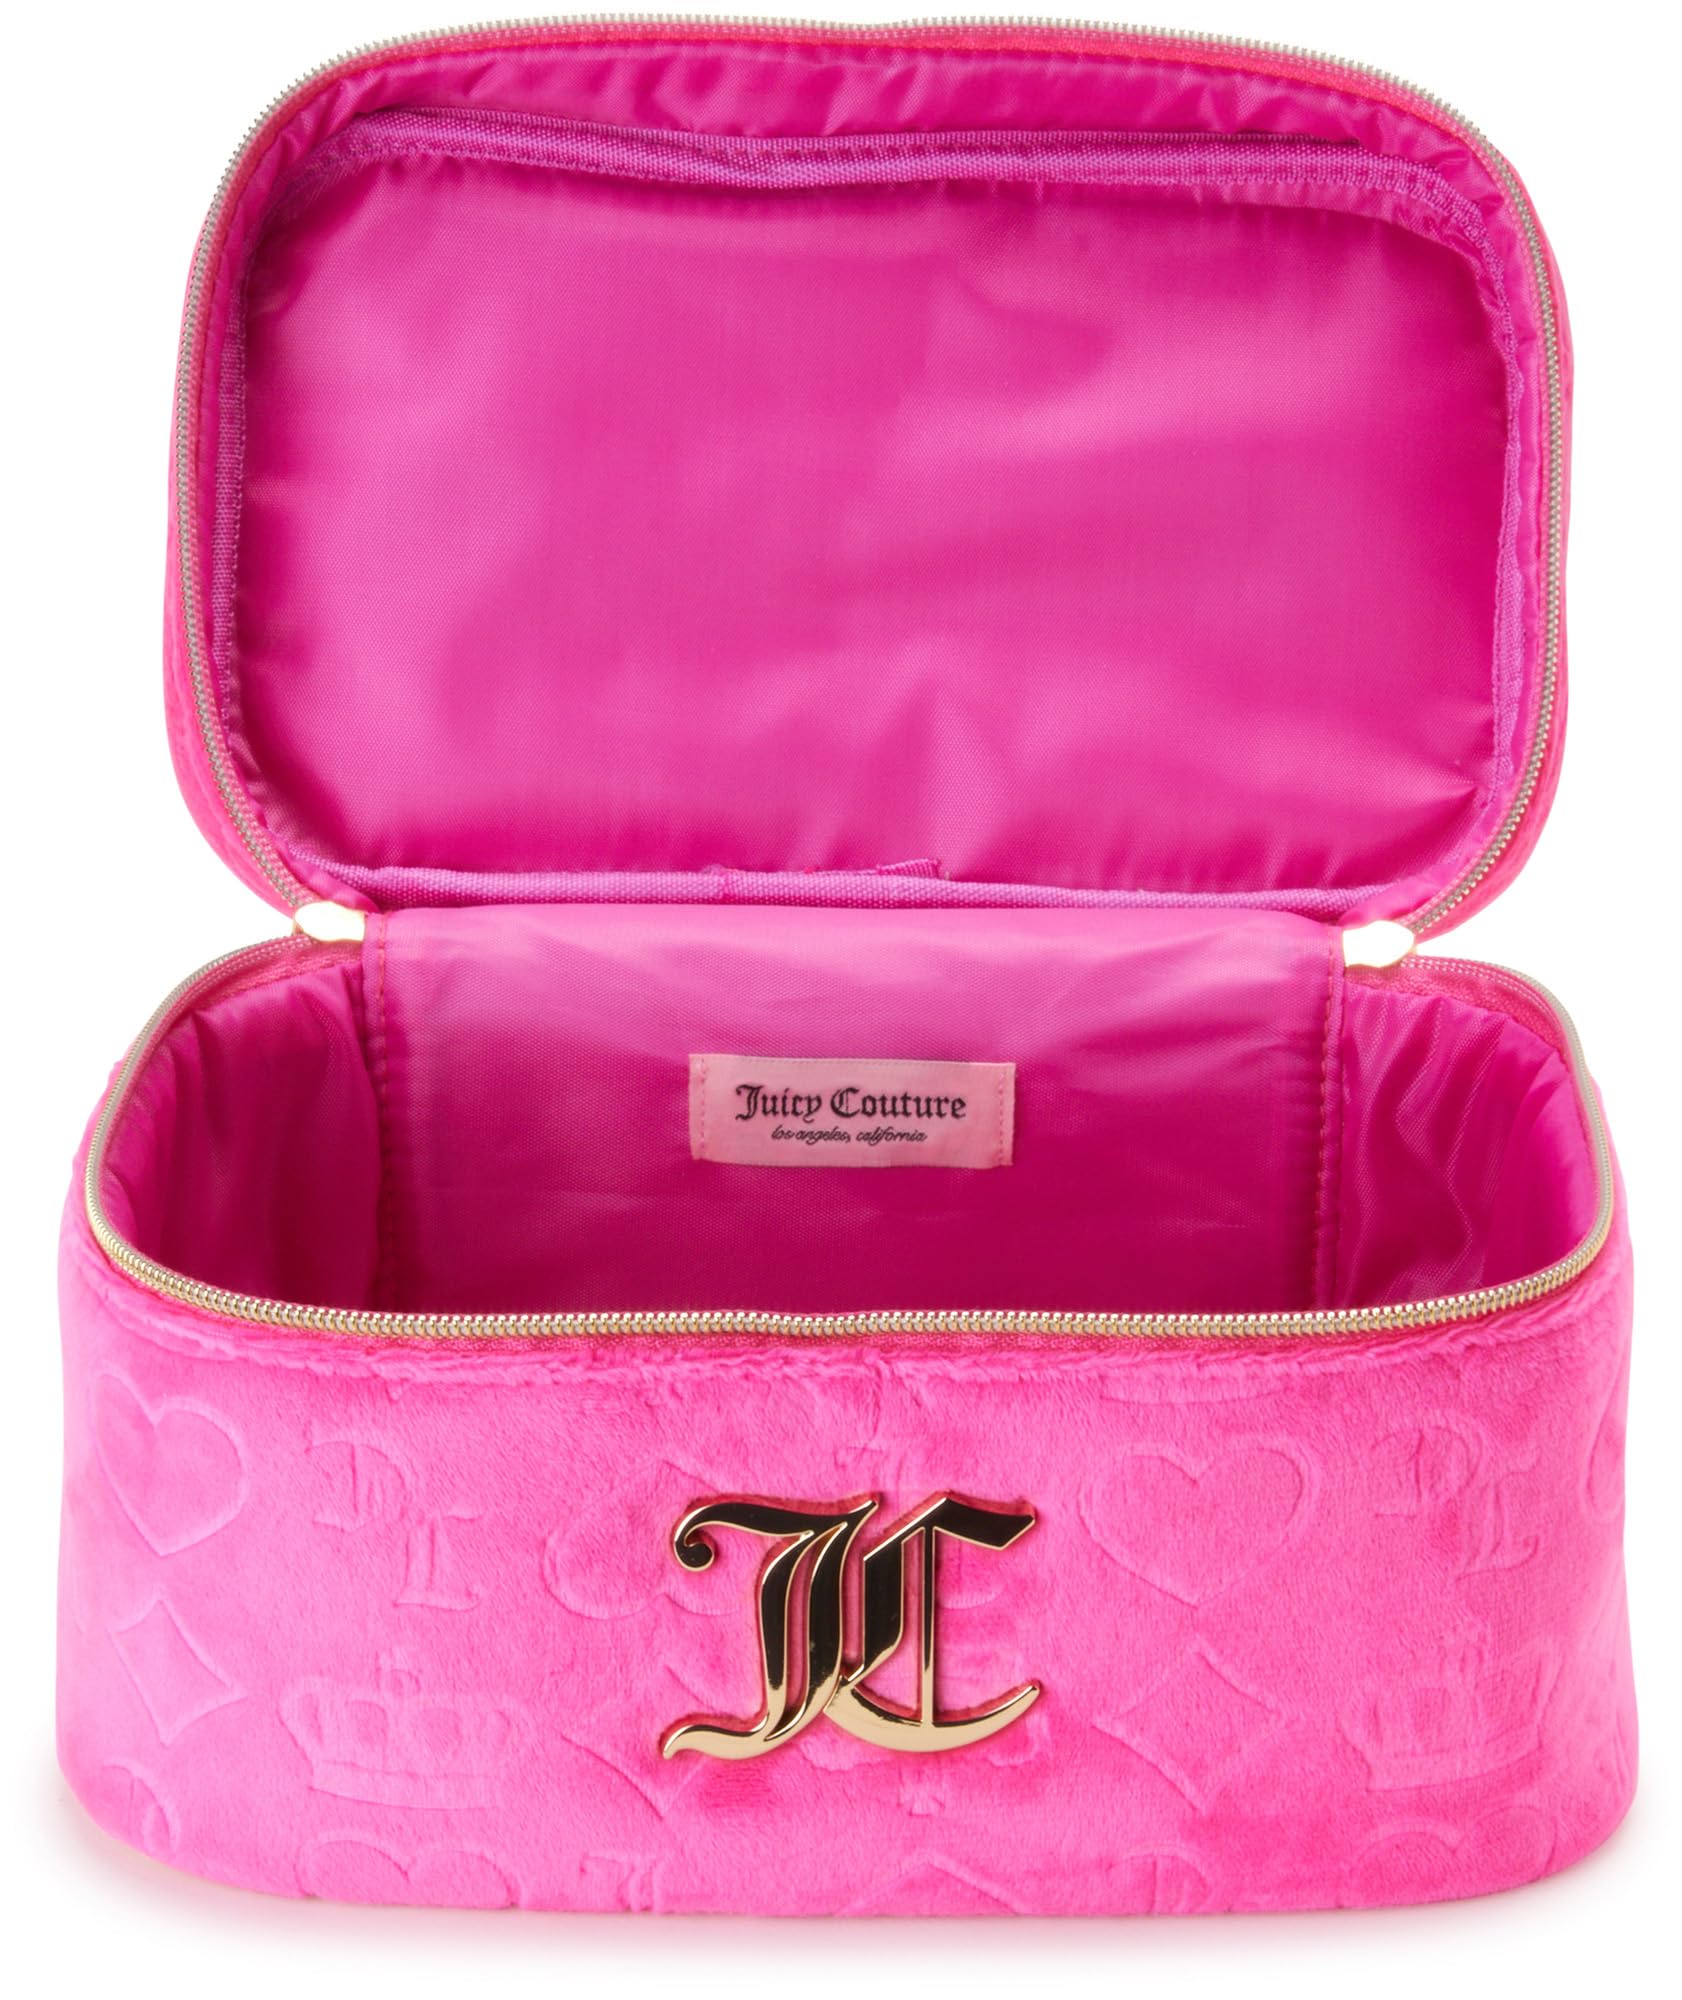 Juicy Couture Women's Cosmetics Bag - Travel Makeup and Toiletries Train Case Organizer, Size One Size, Pink Terry